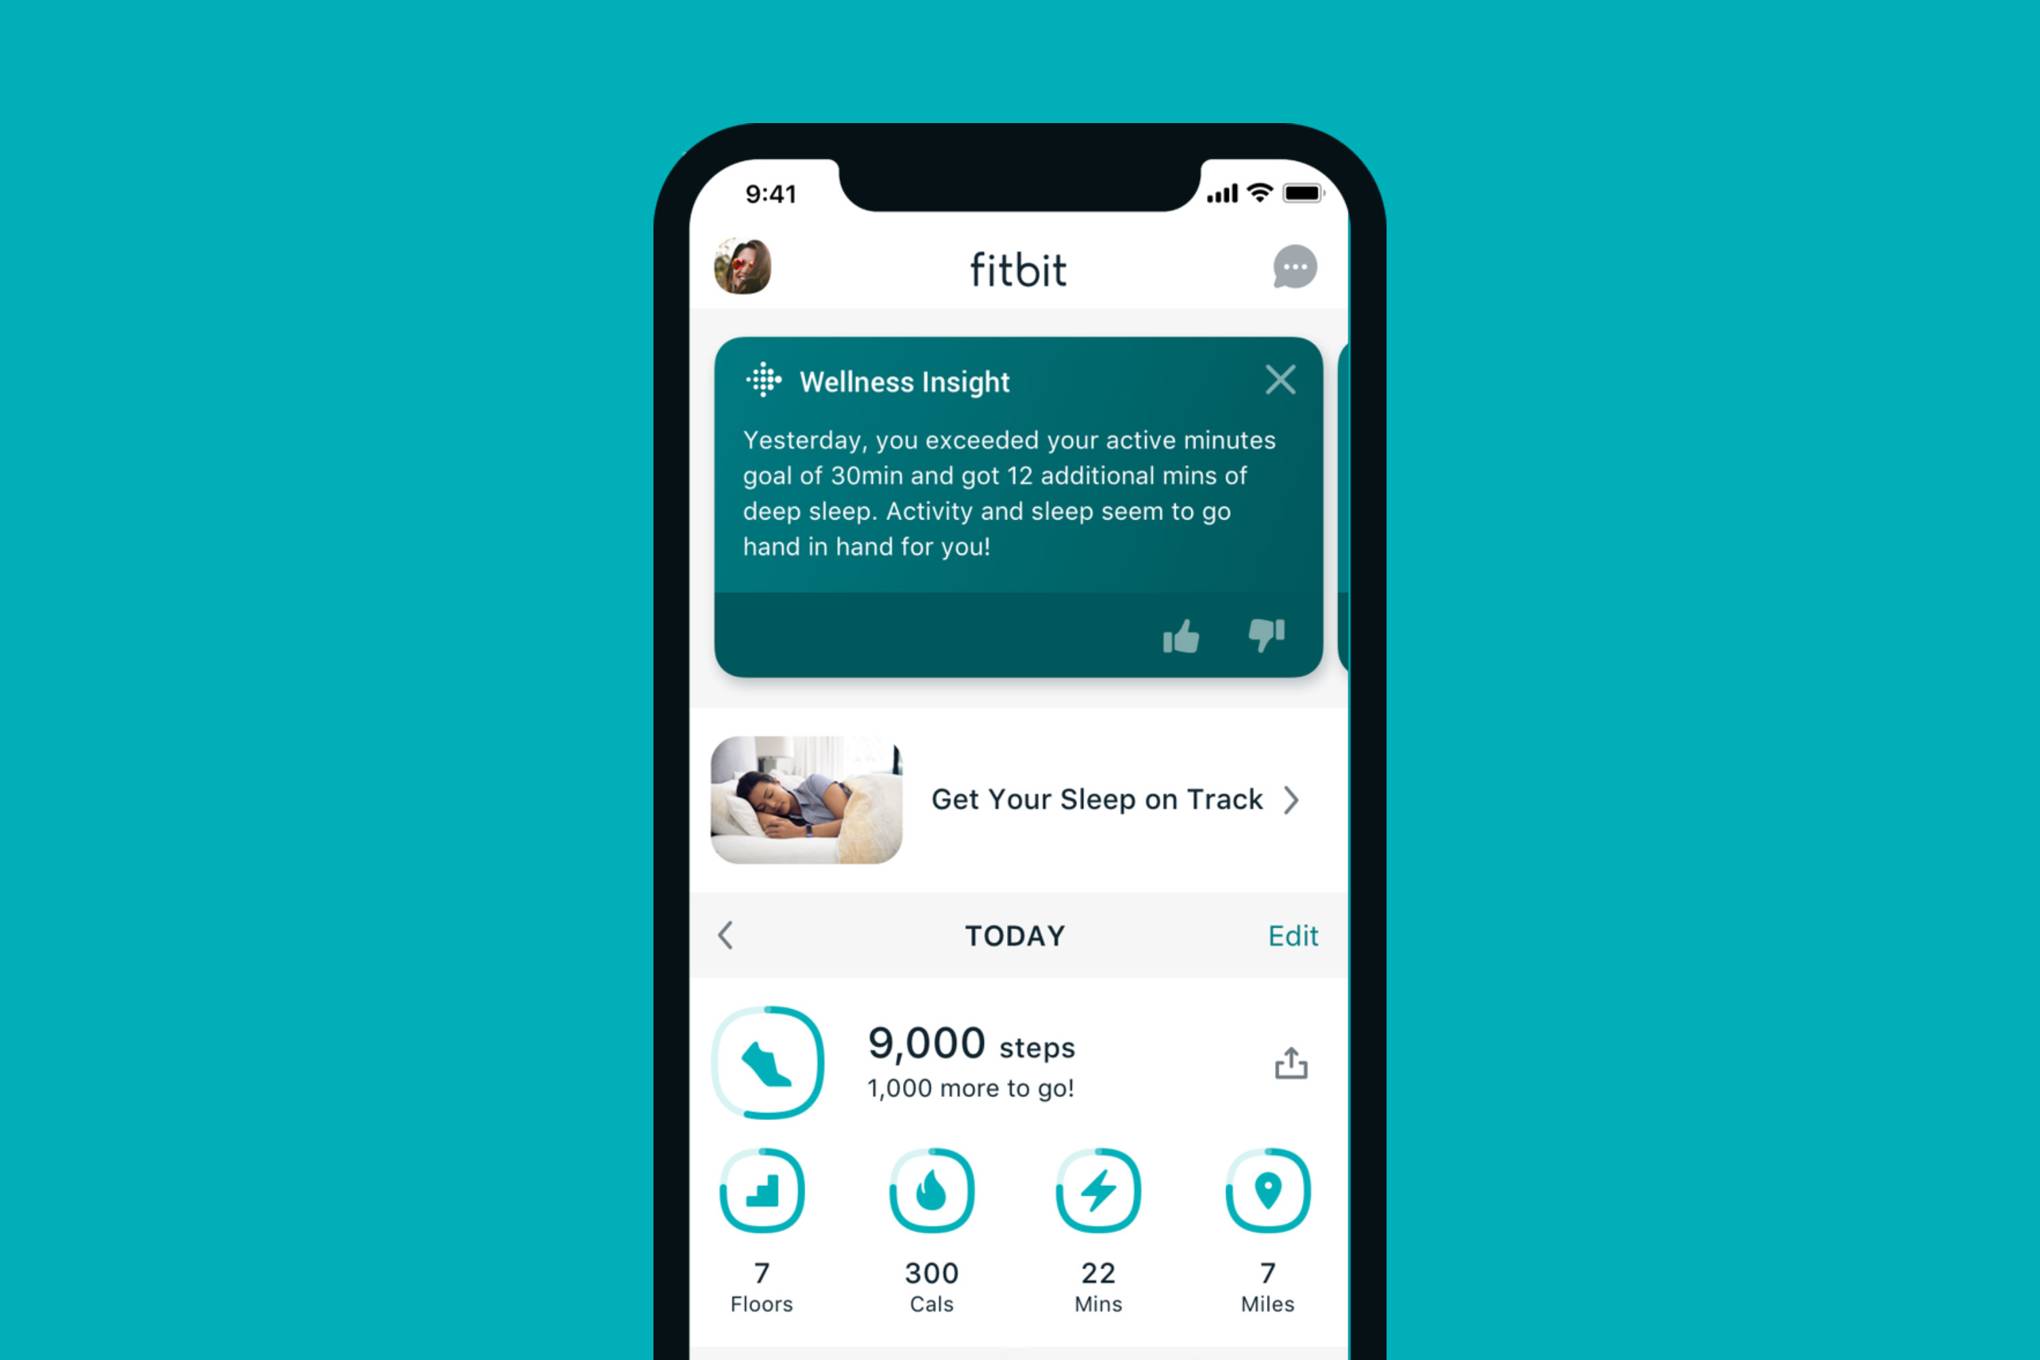 fitbit subscription fee